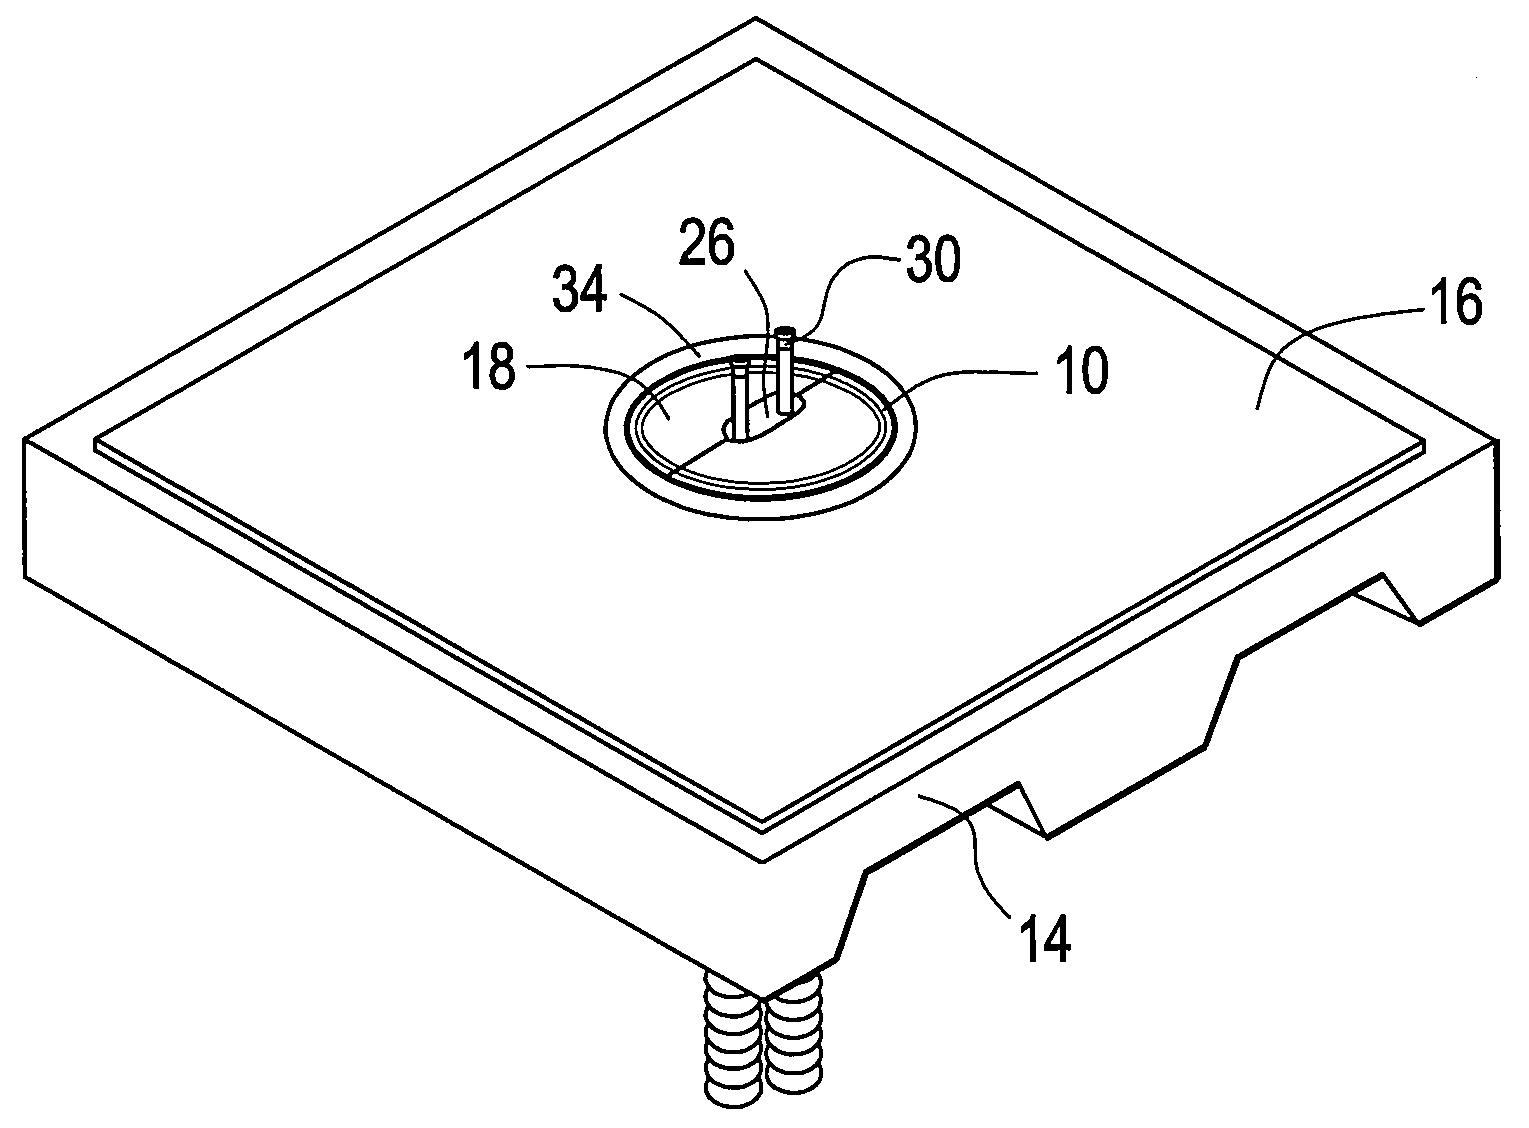 Retention and mounting bracket for recessed electrical outlet box